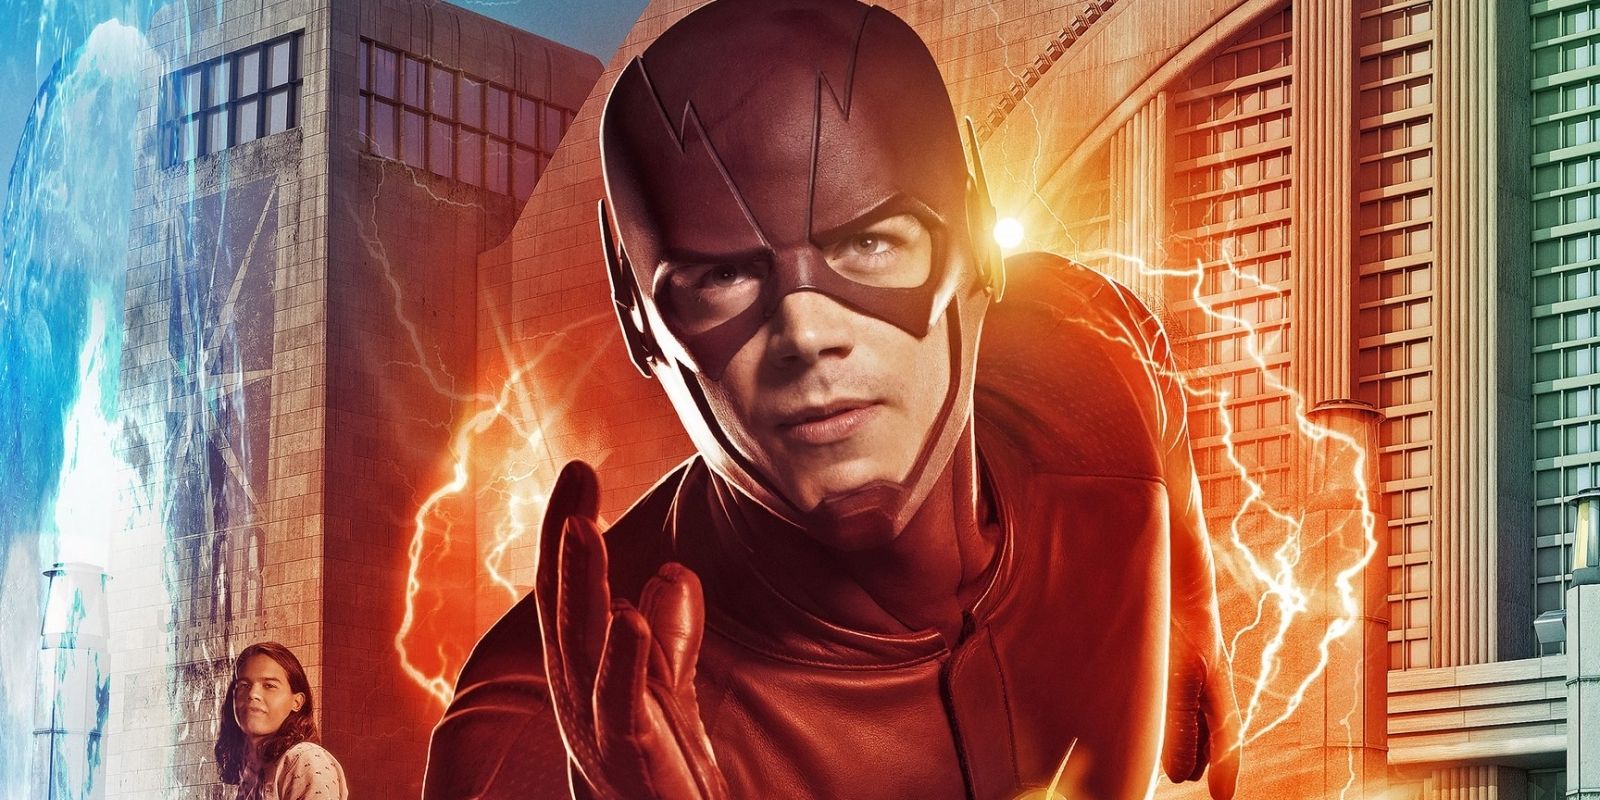 Grant Gustin as The Flash running poster